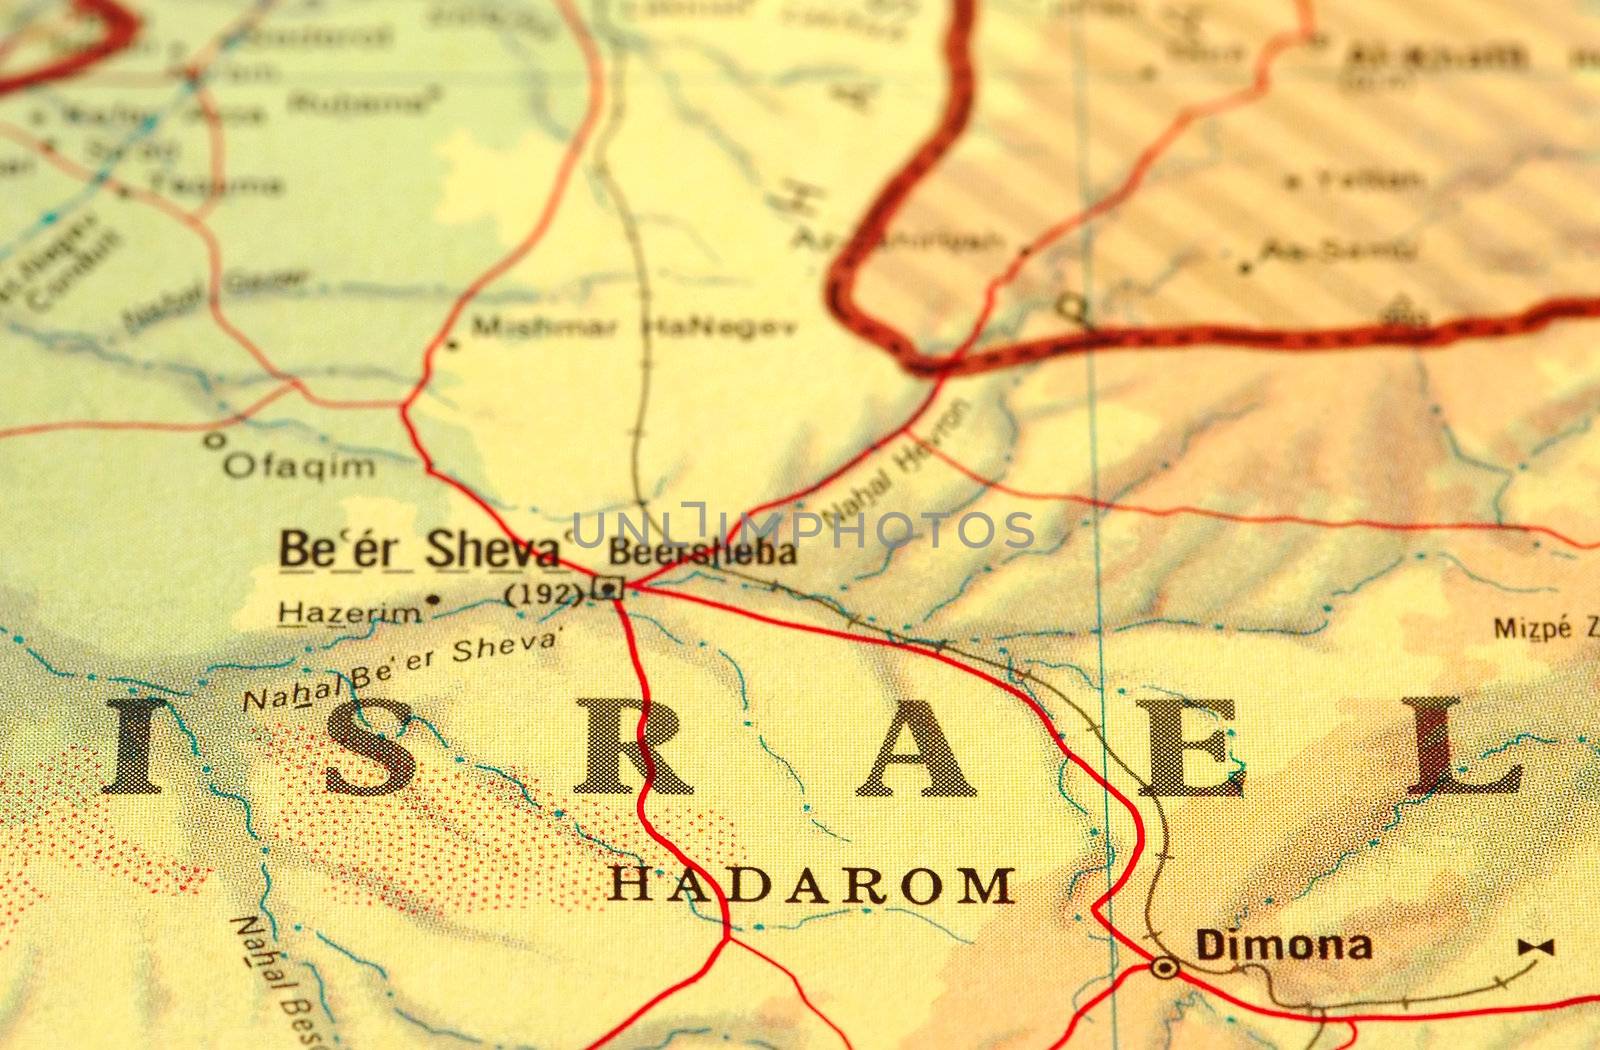 close-up map detail of Israel